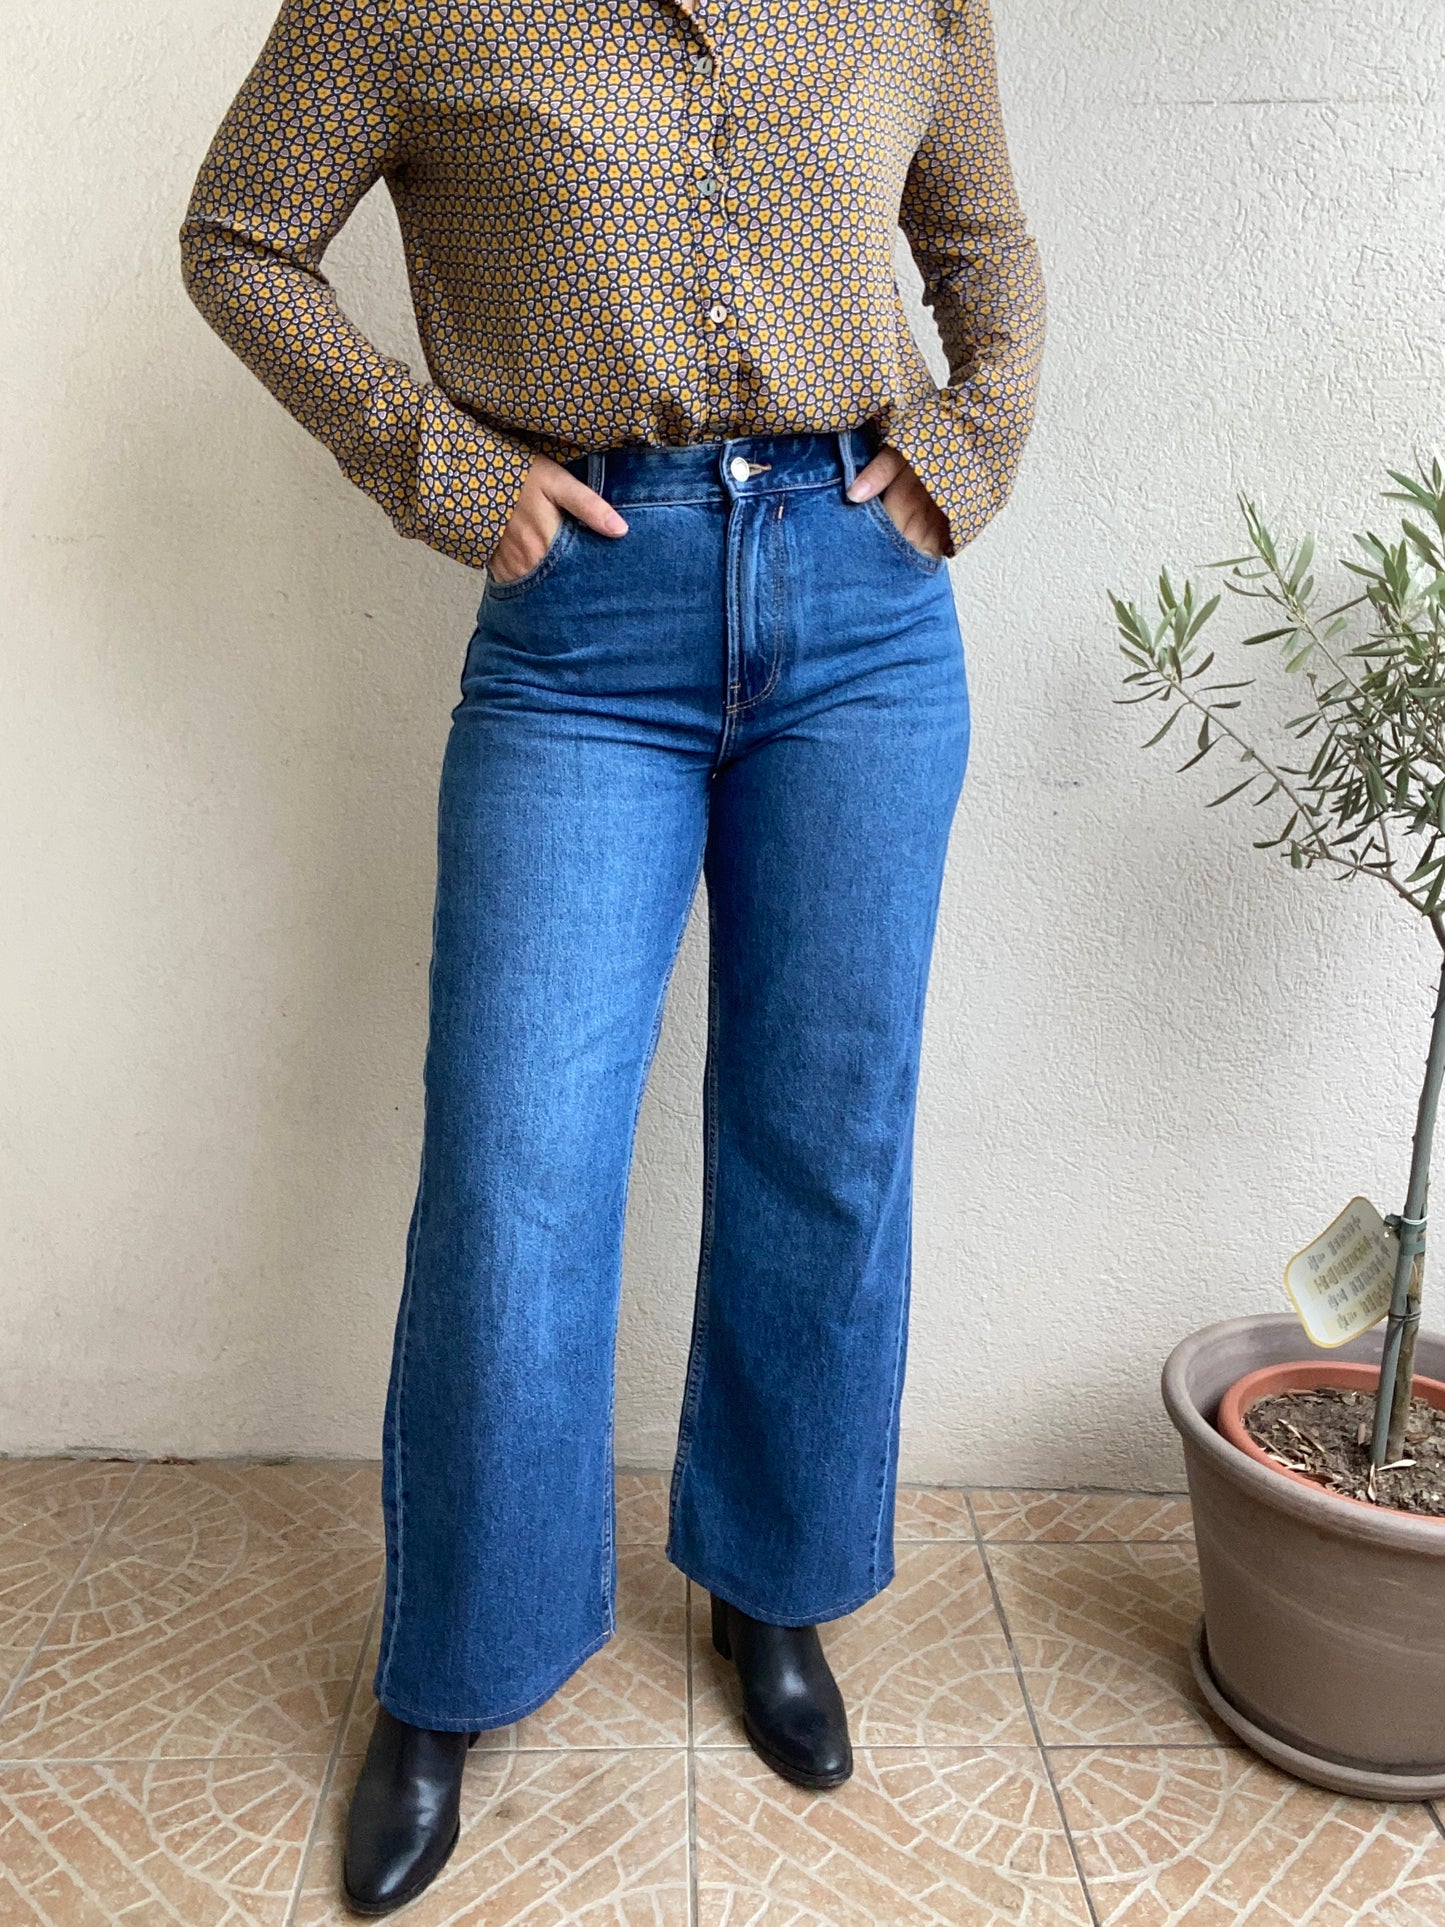 Jeans Bershka flare 90s Taille 38